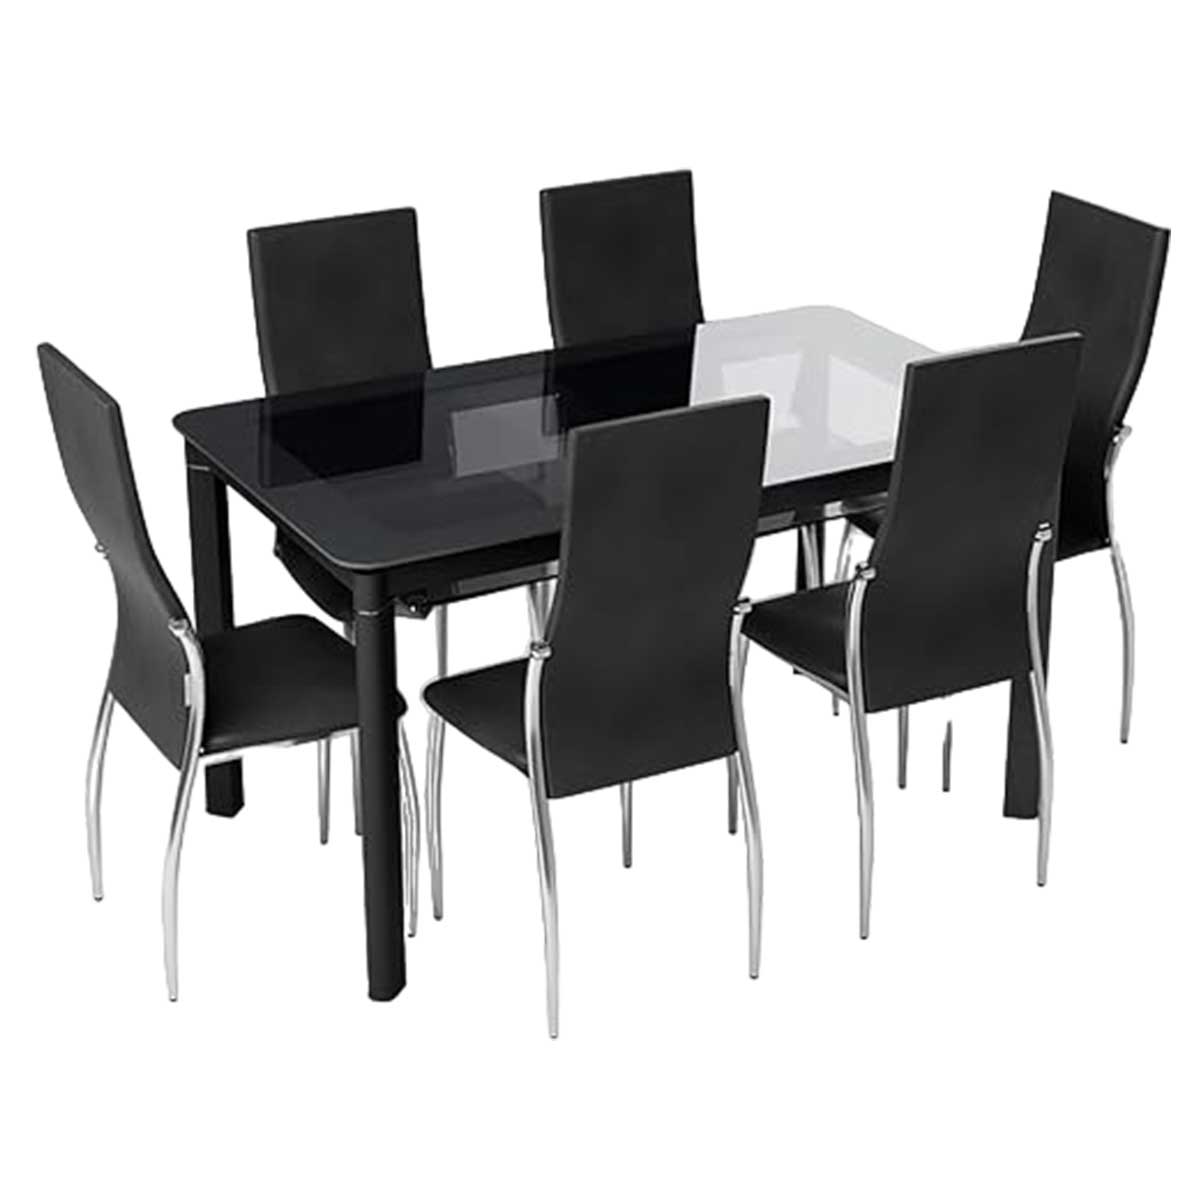 Cafeteria Furniture Set Manufacturers, Suppliers in Rohini Sector 22